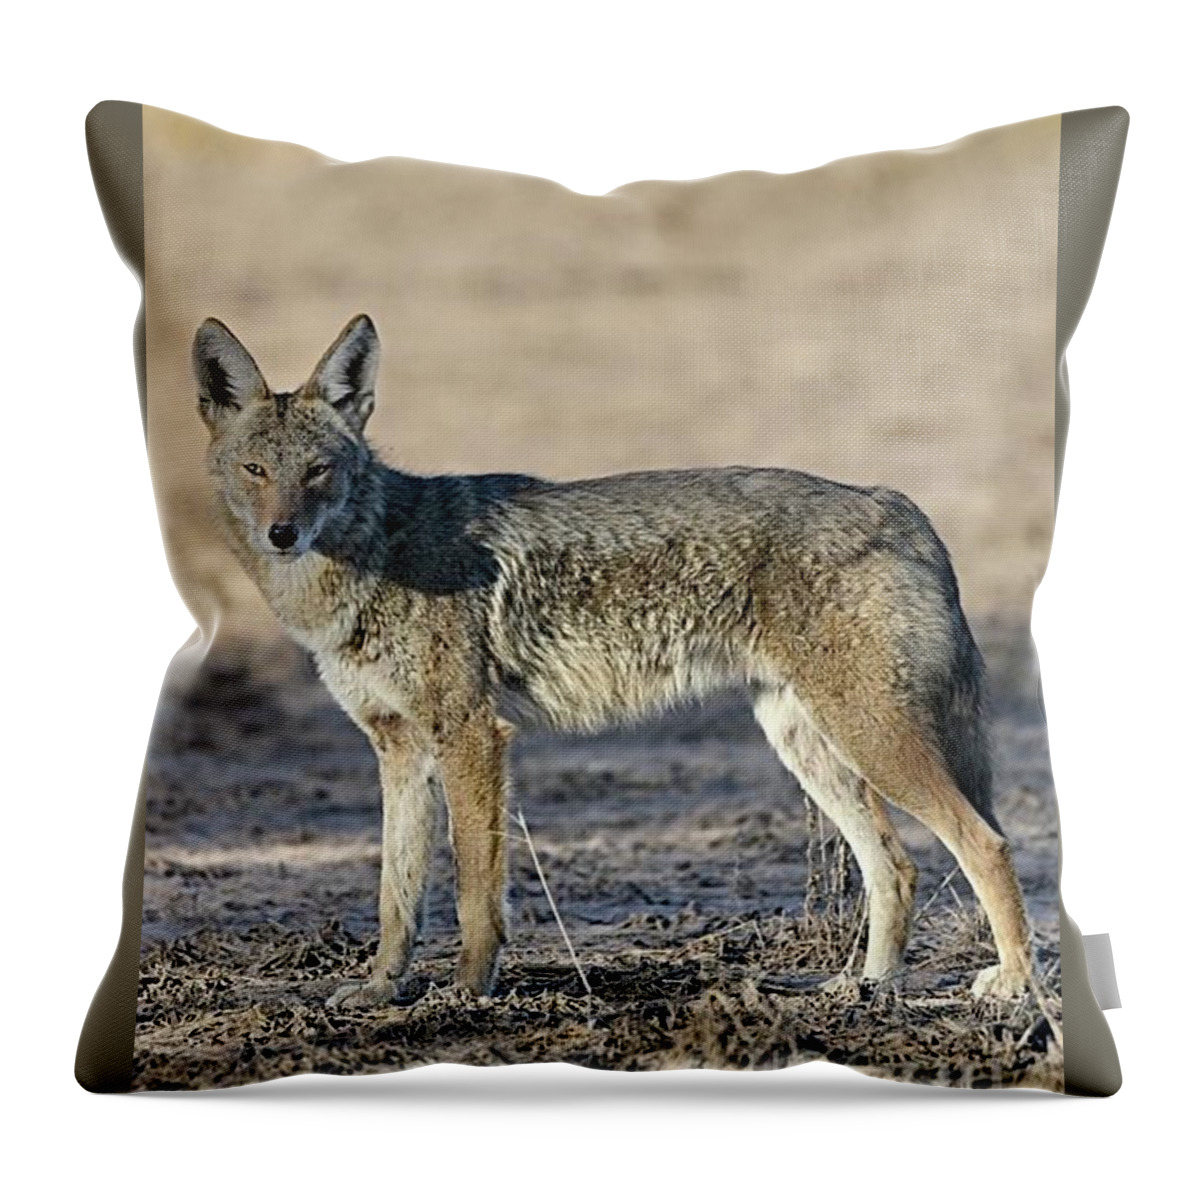 Coyote Throw Pillow featuring the digital art Watchful Eye by Tammy Keyes